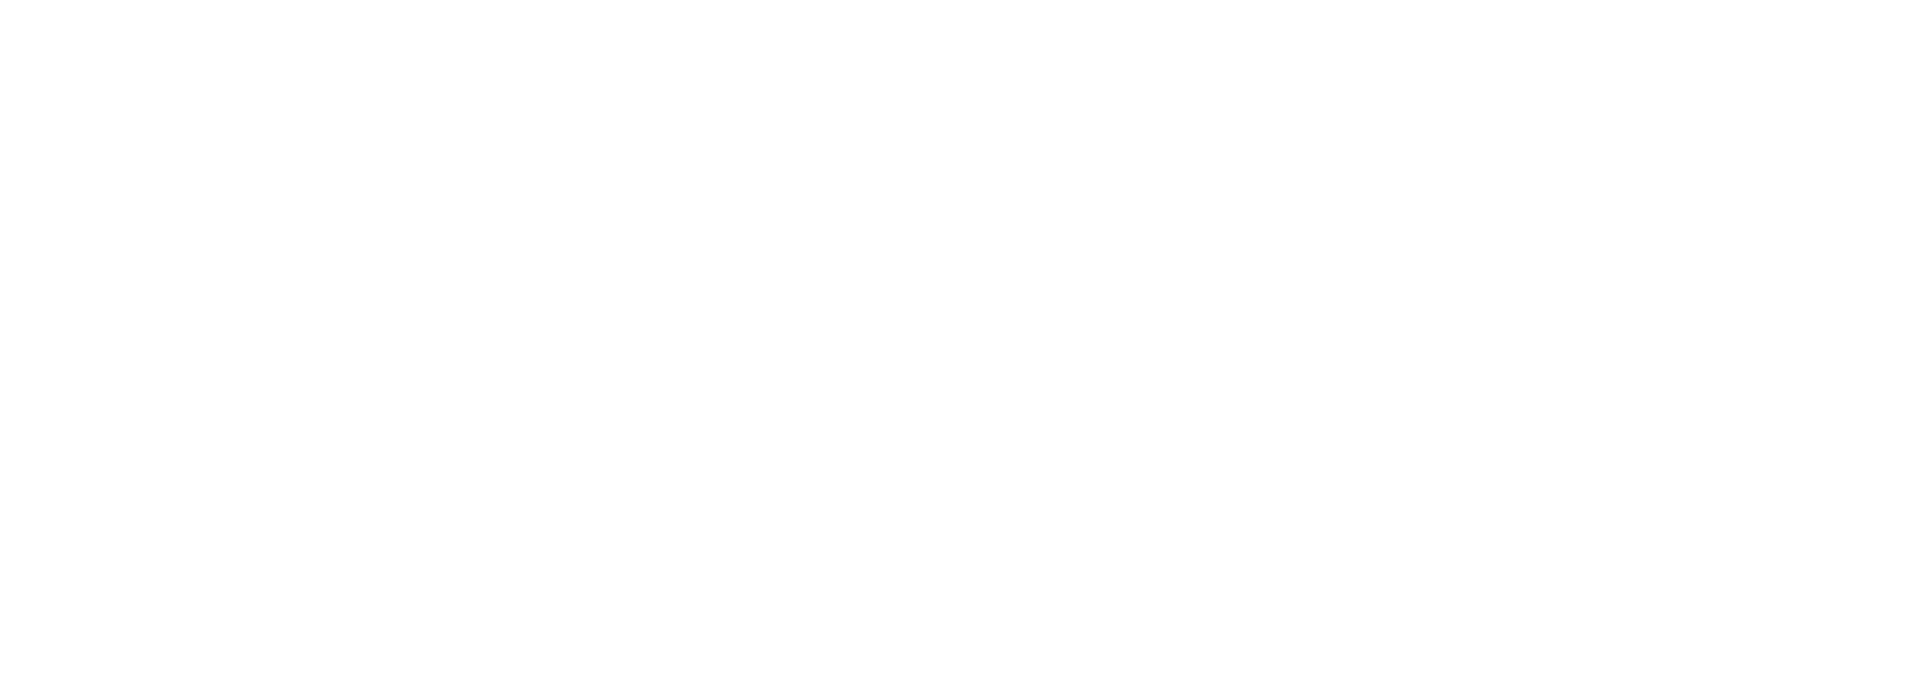 Lucid Logo - LUCID Underwriting, Claims and Insurance Doctors